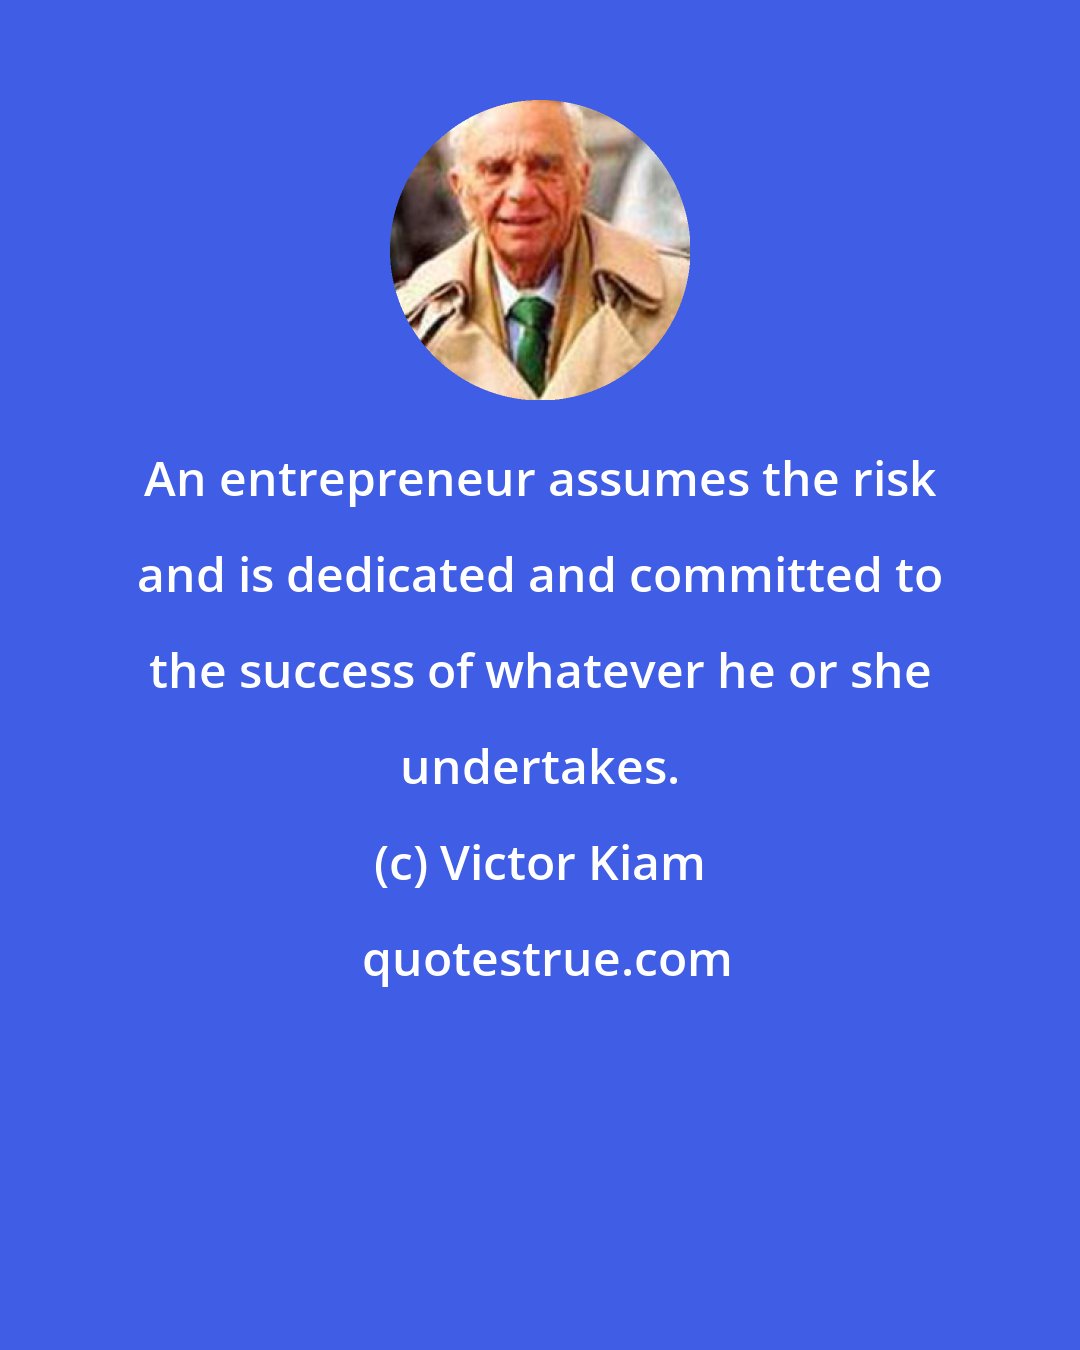 Victor Kiam: An entrepreneur assumes the risk and is dedicated and committed to the success of whatever he or she undertakes.